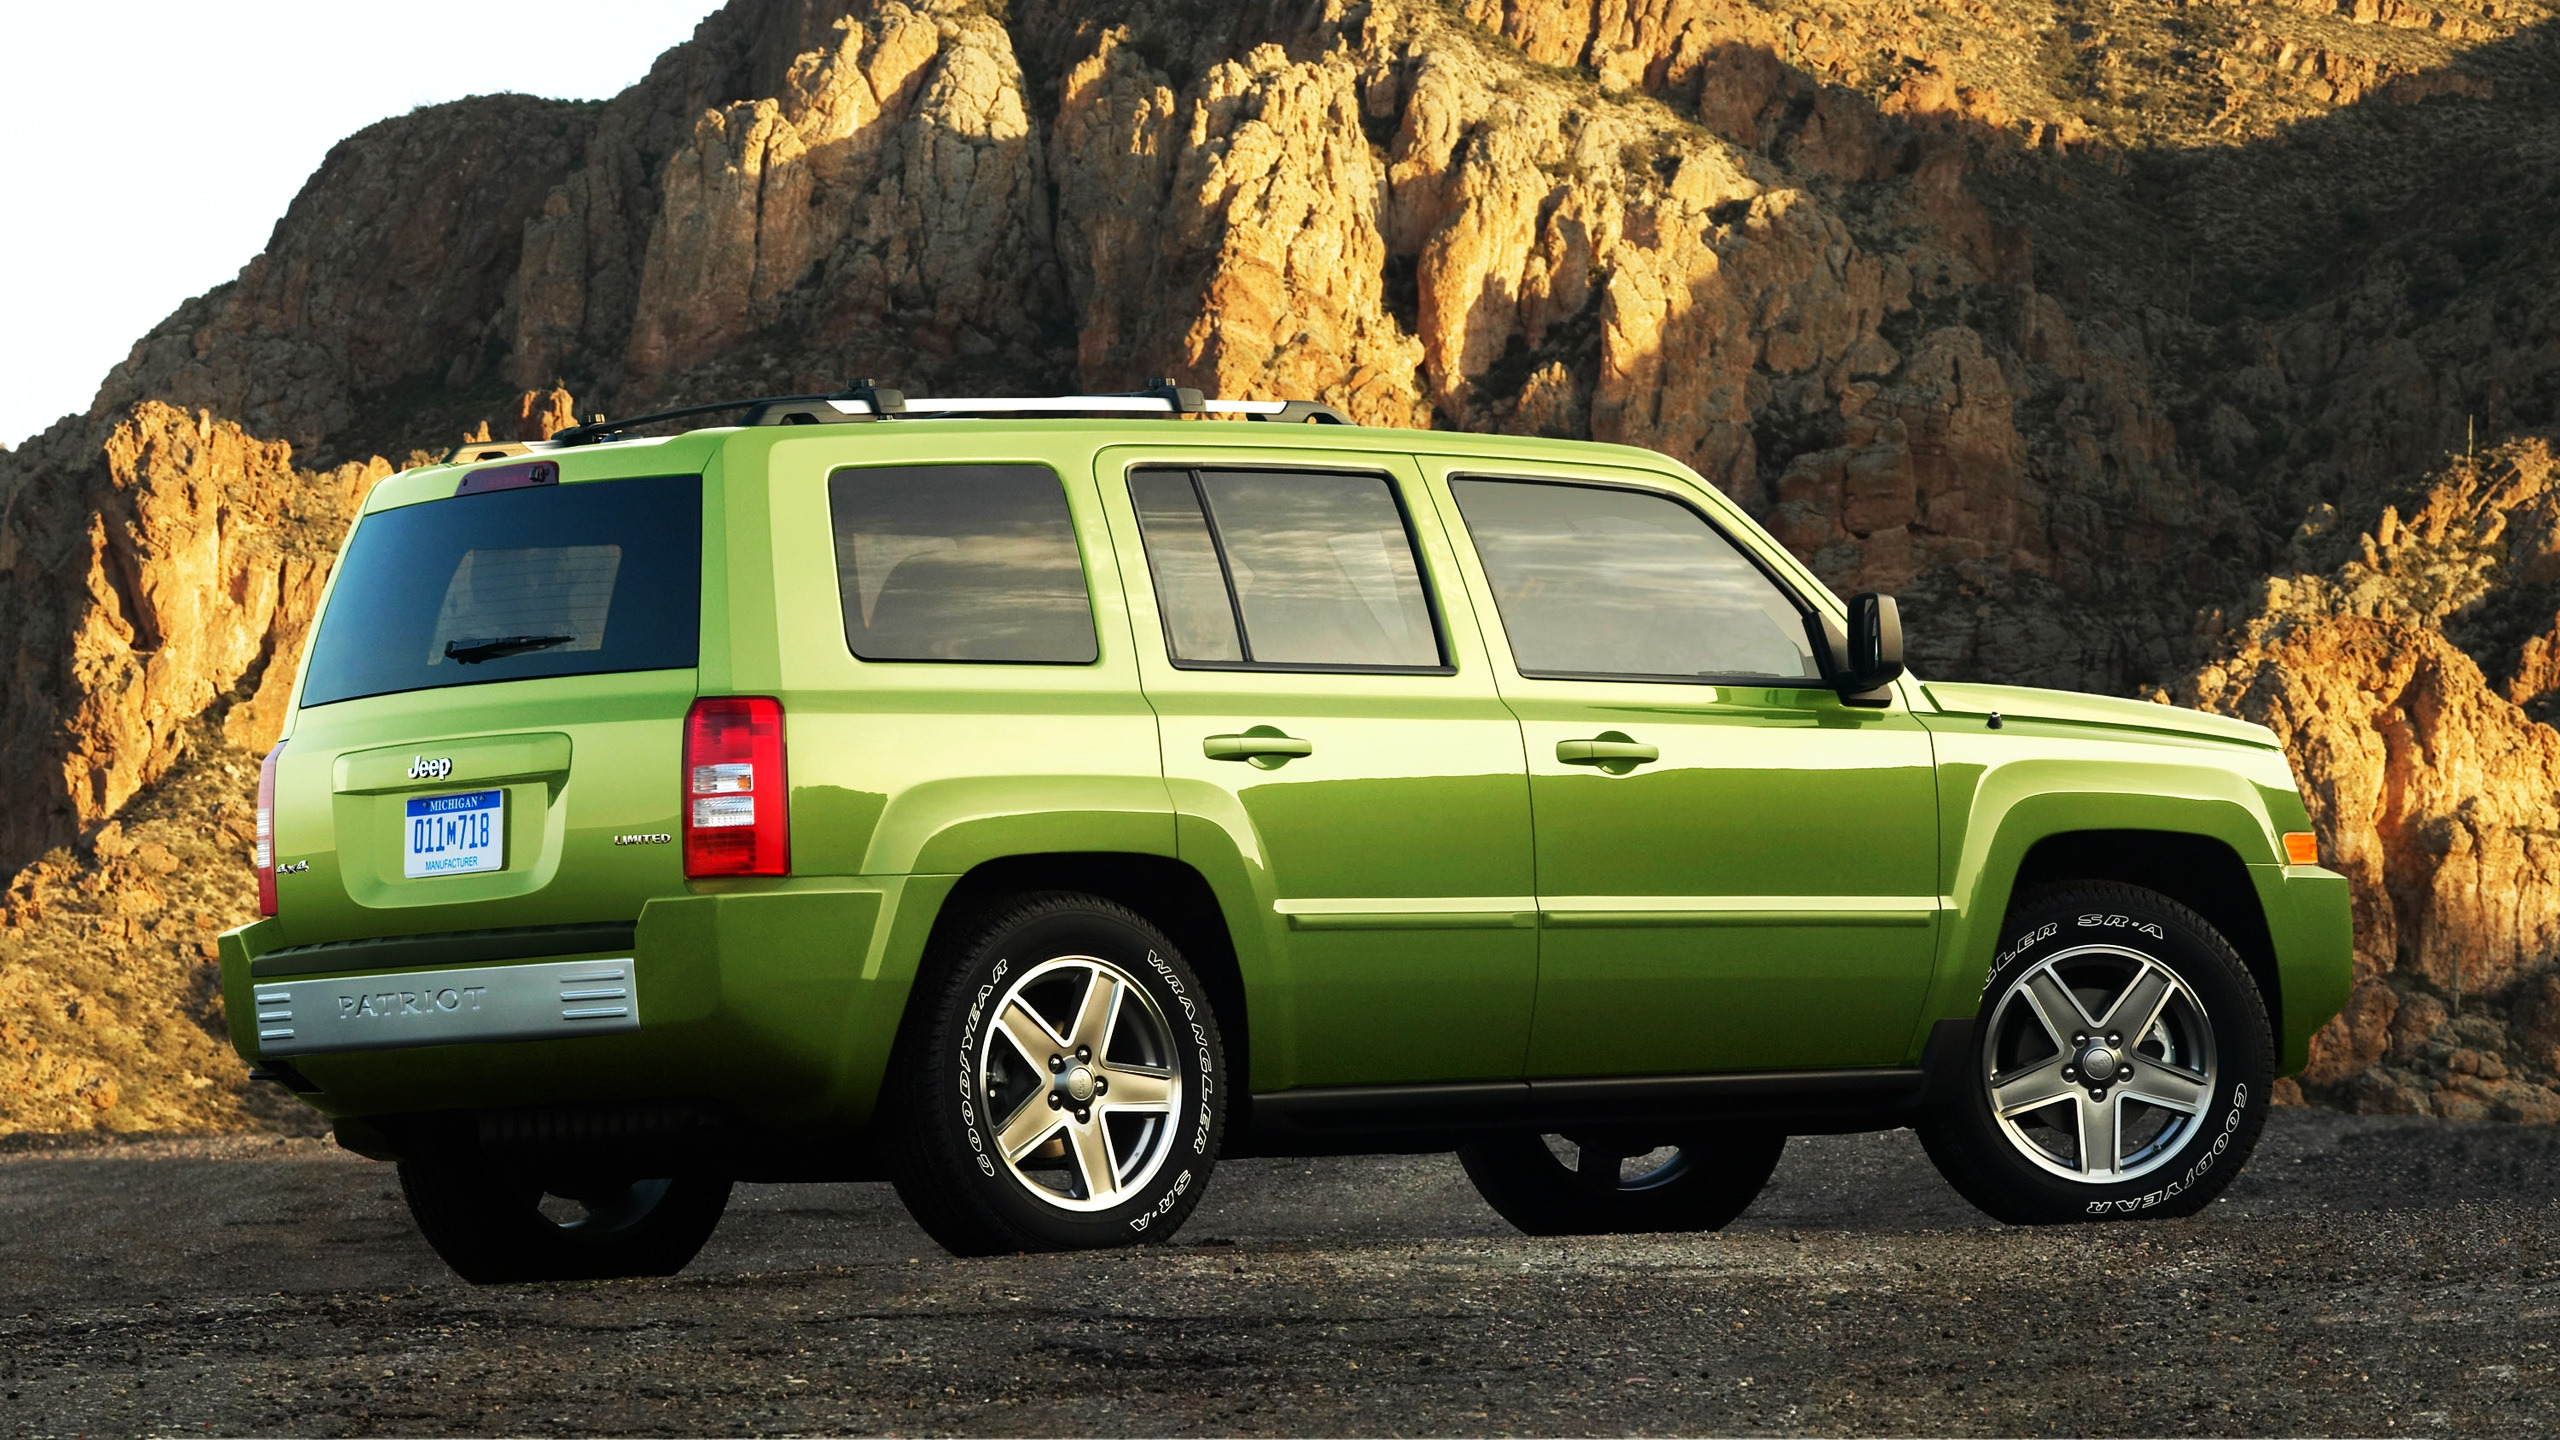 Jeep Patriot Limited for 2560x1440 HDTV resolution